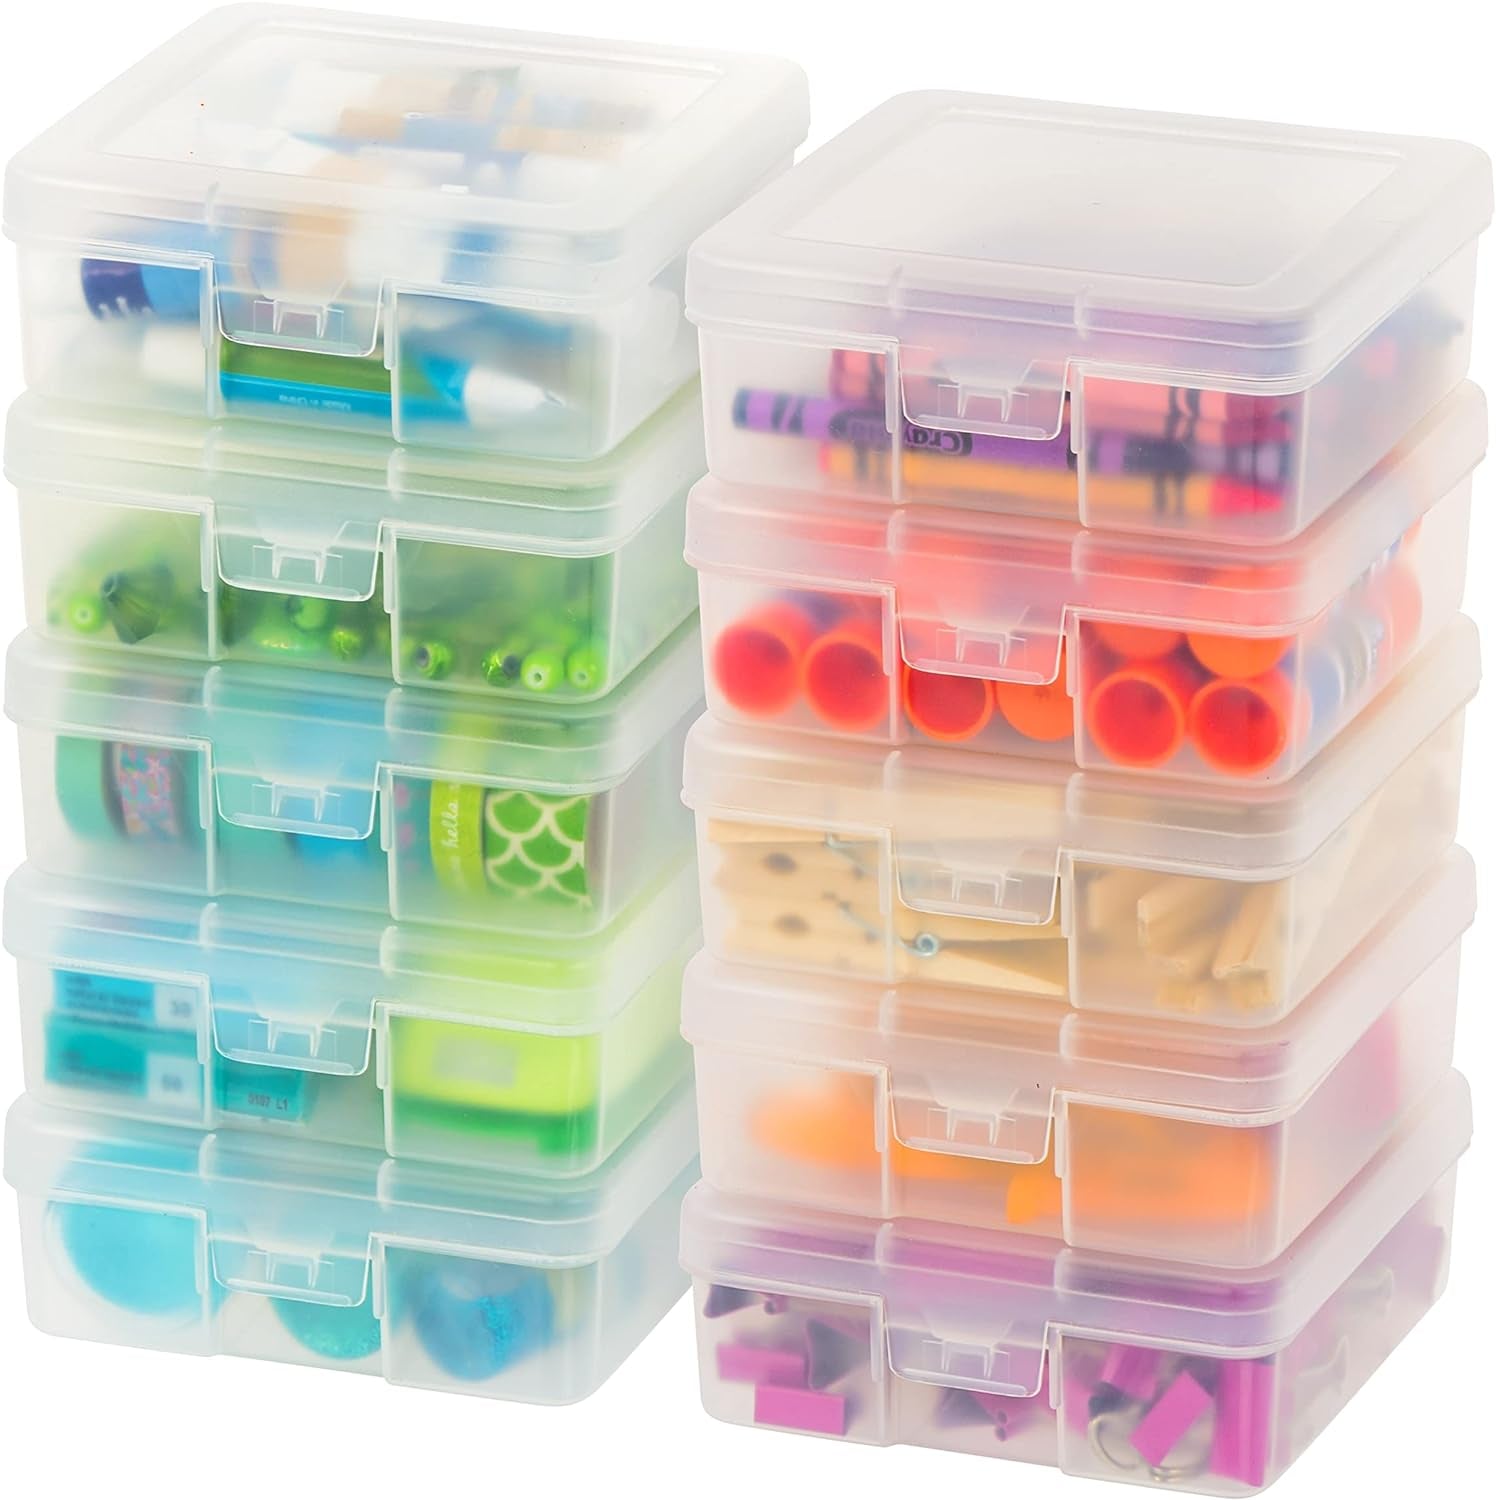 USA Plastic Bead Craft Hobby Art School Supply Pencil Box Storage Organizer Container with Latching Lid, 10-Pack, for Pens Ribbons Wahi Tape Sticker Yarn Ornaments, Stackable, Clear, Medium